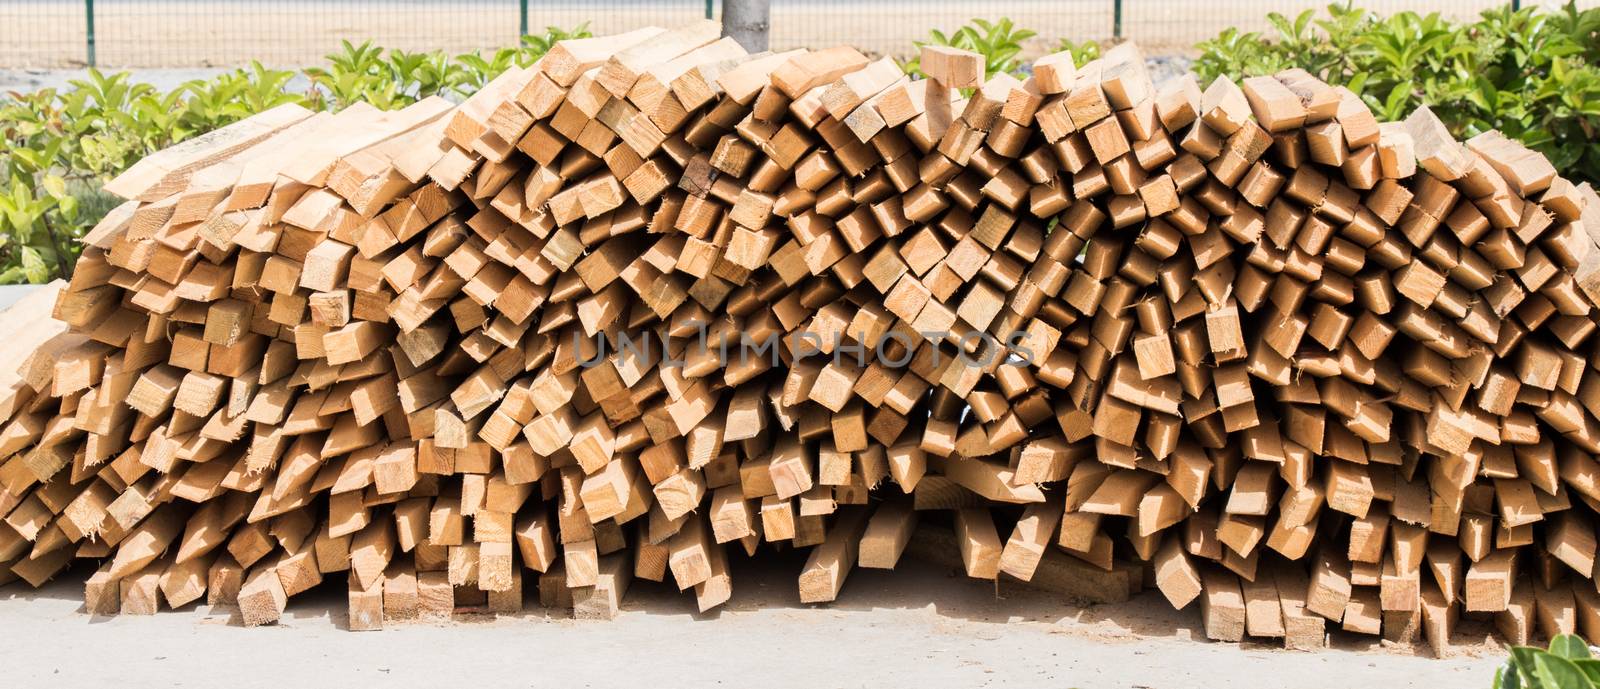 Stockpile of wooden blocks in the the view